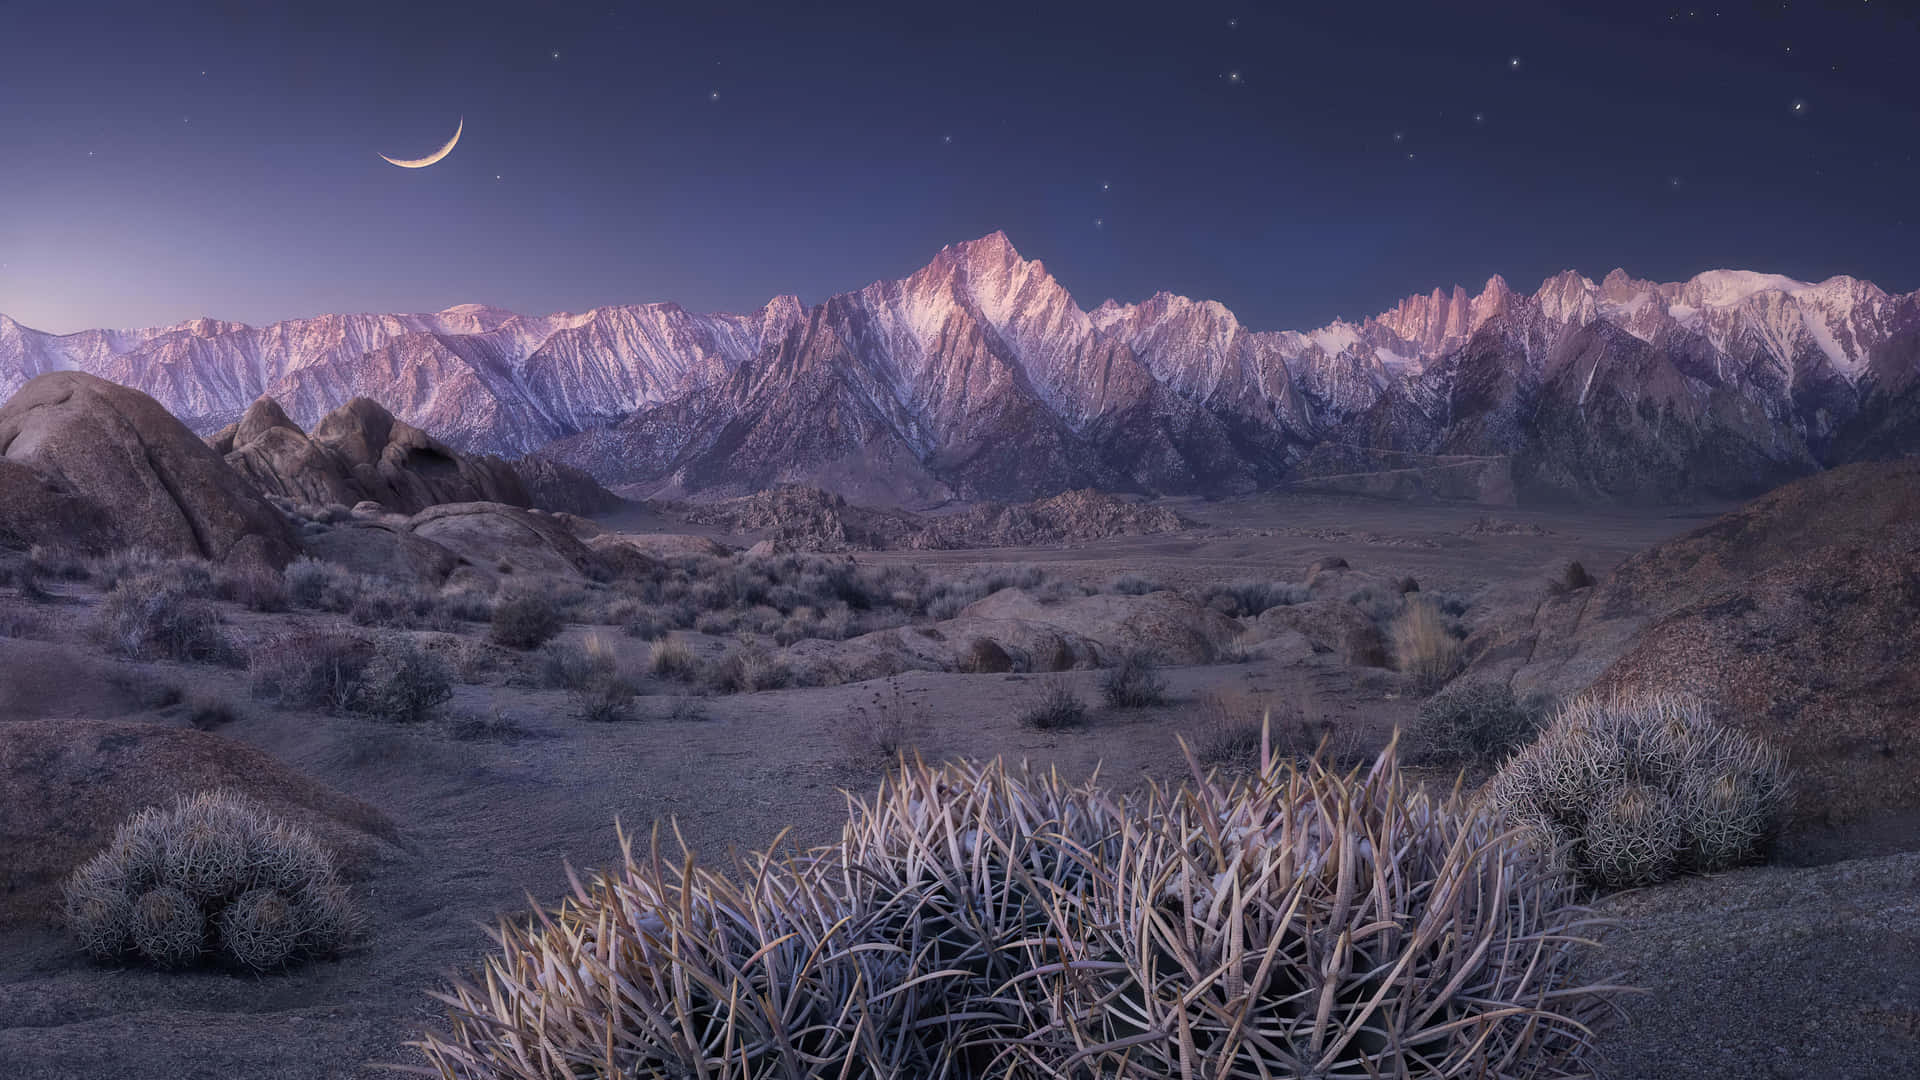 A Desert Landscape With Cactus And Mountains At Night Wallpaper